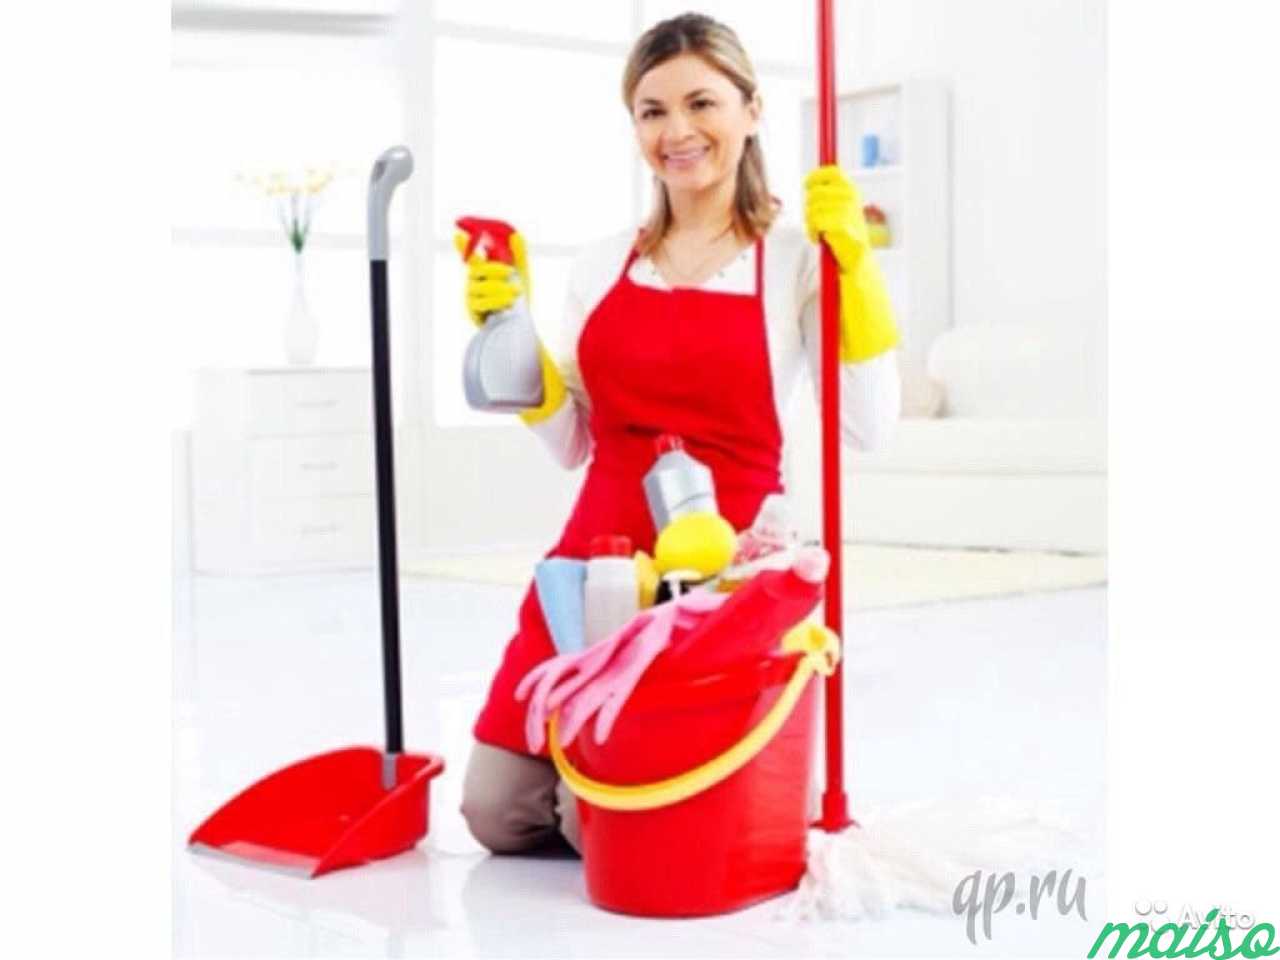 H cleaning. Уборщица. Девушка уборщица. Клининг. Клининг Барнаул.